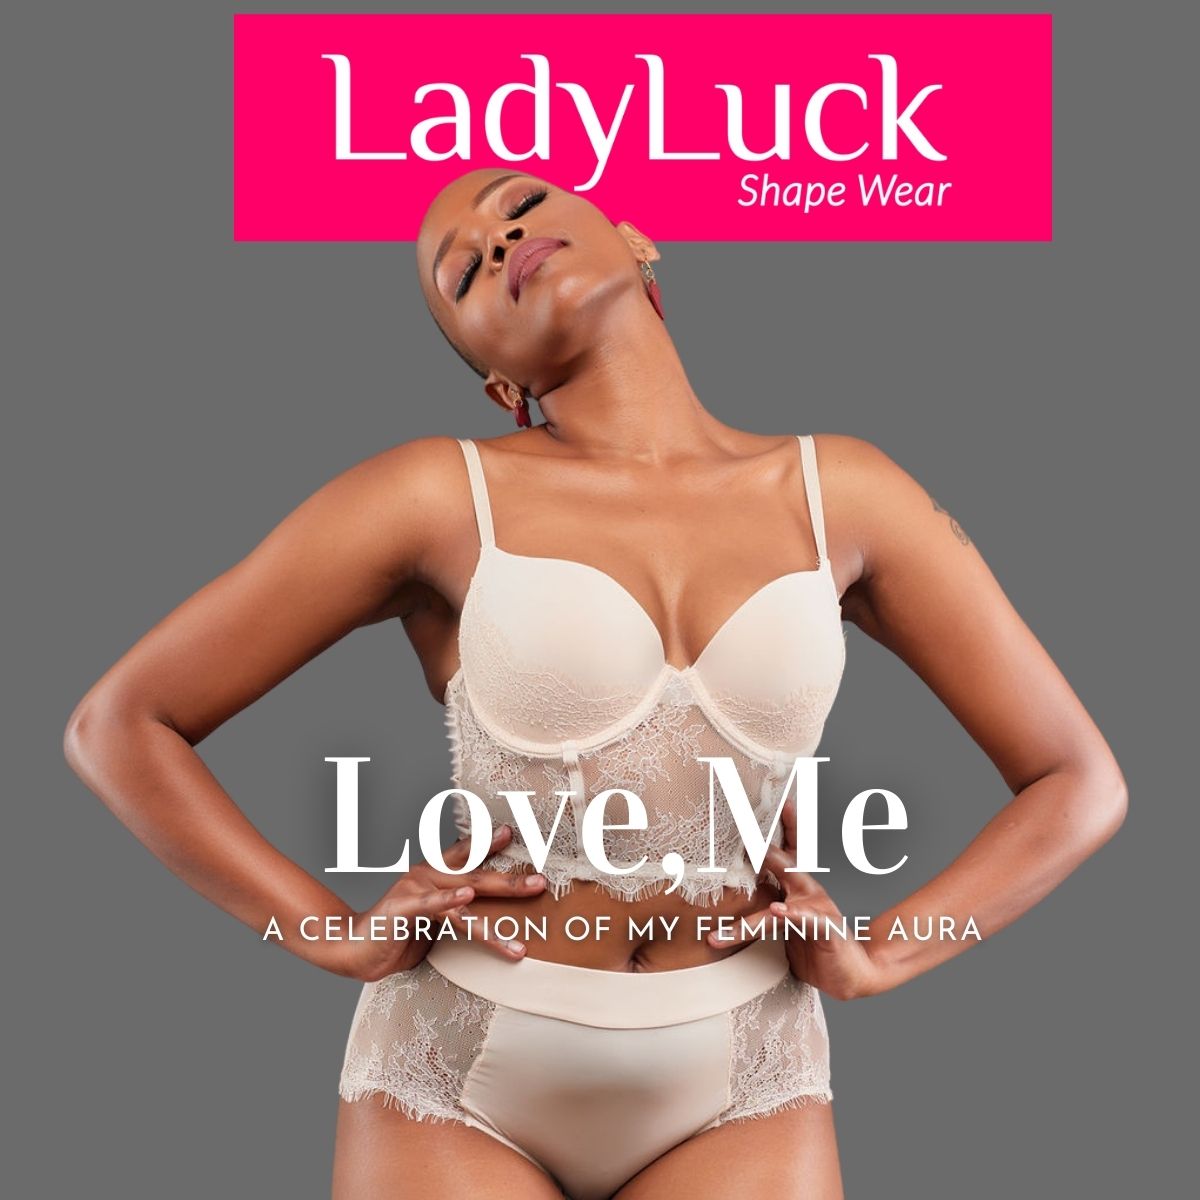 The Lady Luck “LOVE, ME” collection - Galleria Shopping Mall – Galleria  Shopping Mall